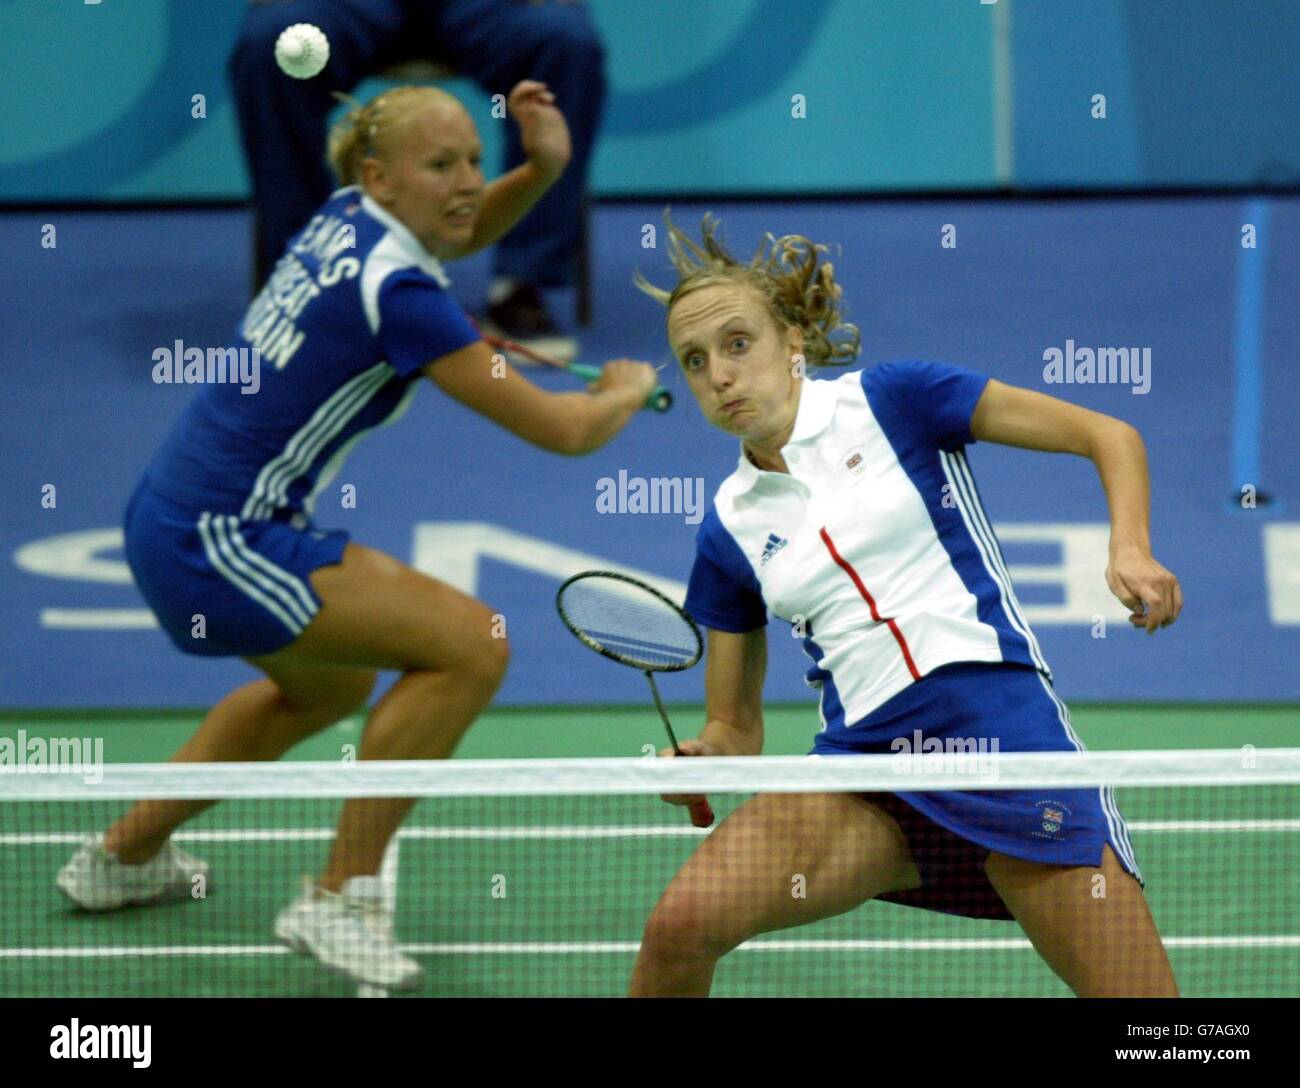 Britain's Donna Kellogg (right) and Gail Emms in action against China's Tingting Zhao and Yili Wei in the Badminton Women's Doubles qualifiers at the Goudi Olympic Hall in Athens, Greece. Stock Photo